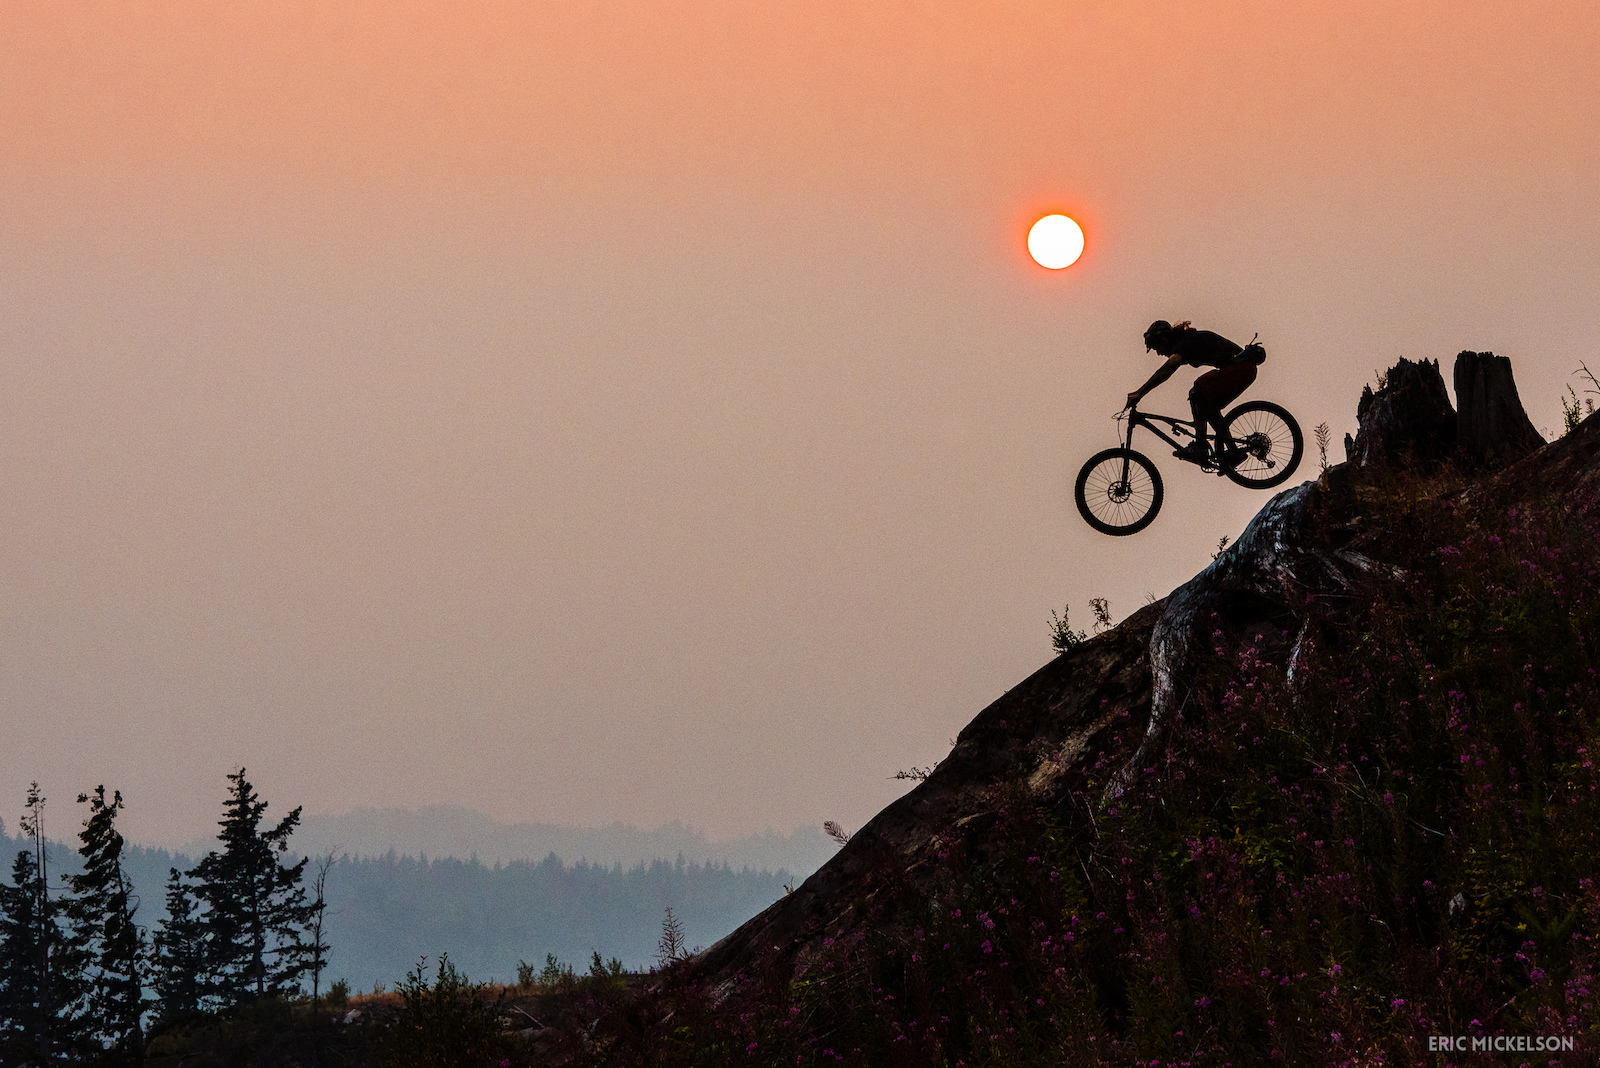 Ty Deschaine airing onto a slab on a smoky evening in Bellingham.